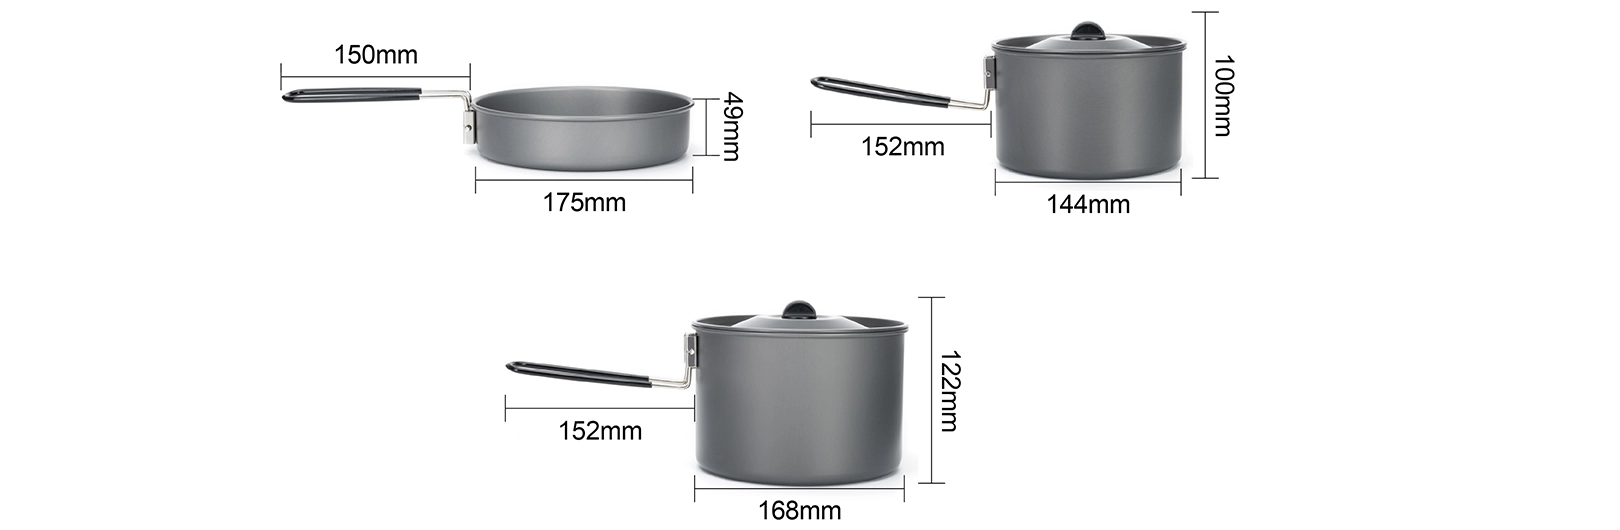 details of Aluminum Camping Cookware Sauce Pot and Tea Kettle Mess Kit for Backpacking Mountaineering Camp